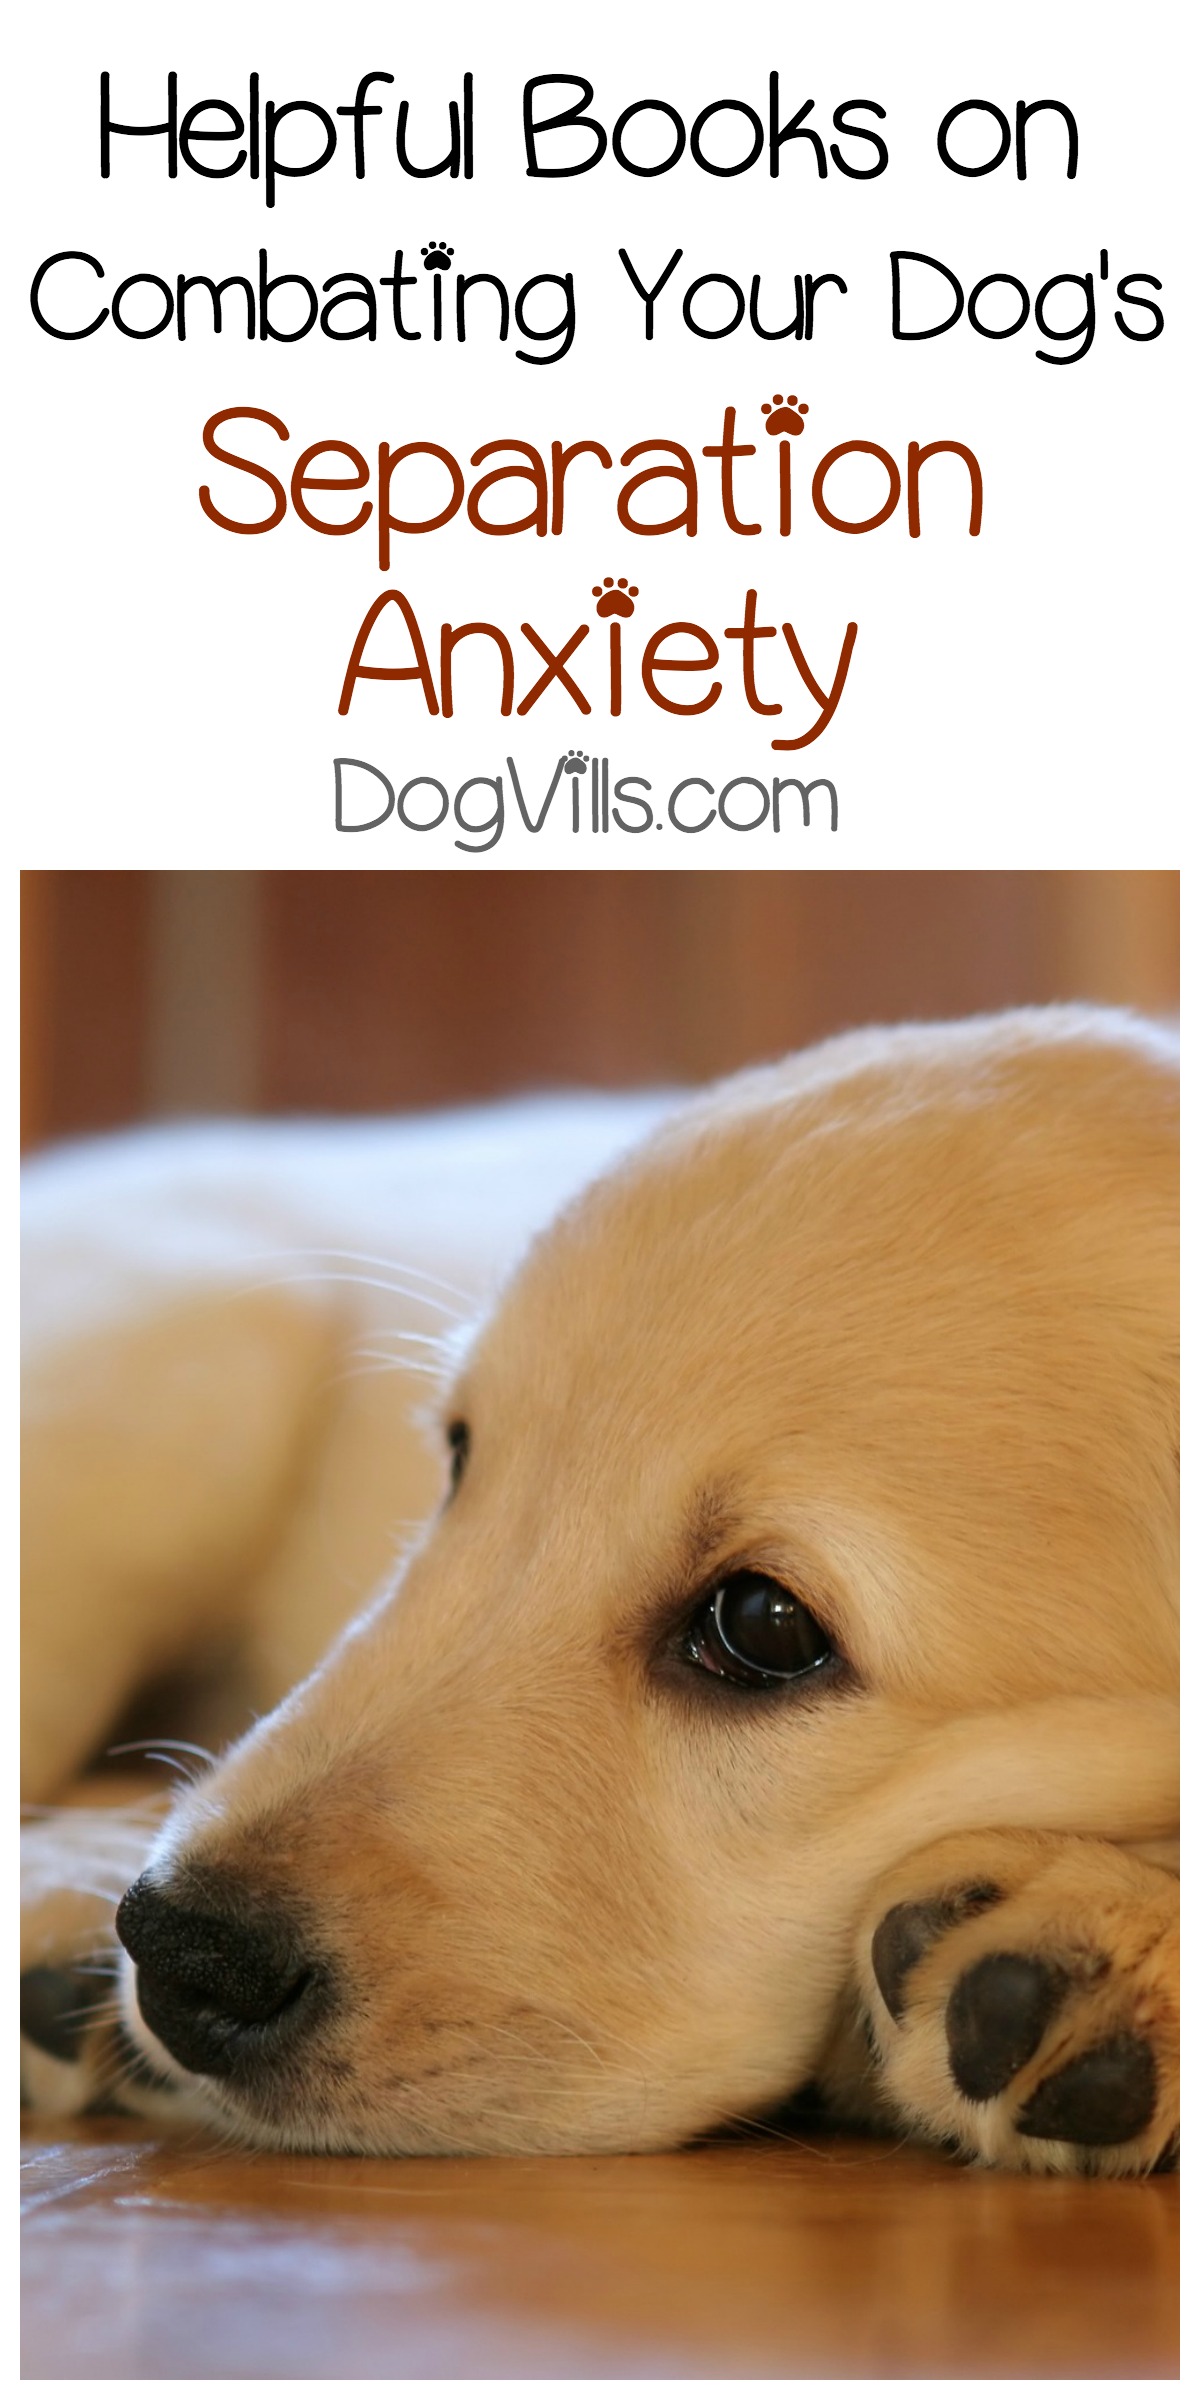 3 Helpful Books On Combating Your Dog's Separation Anxiety